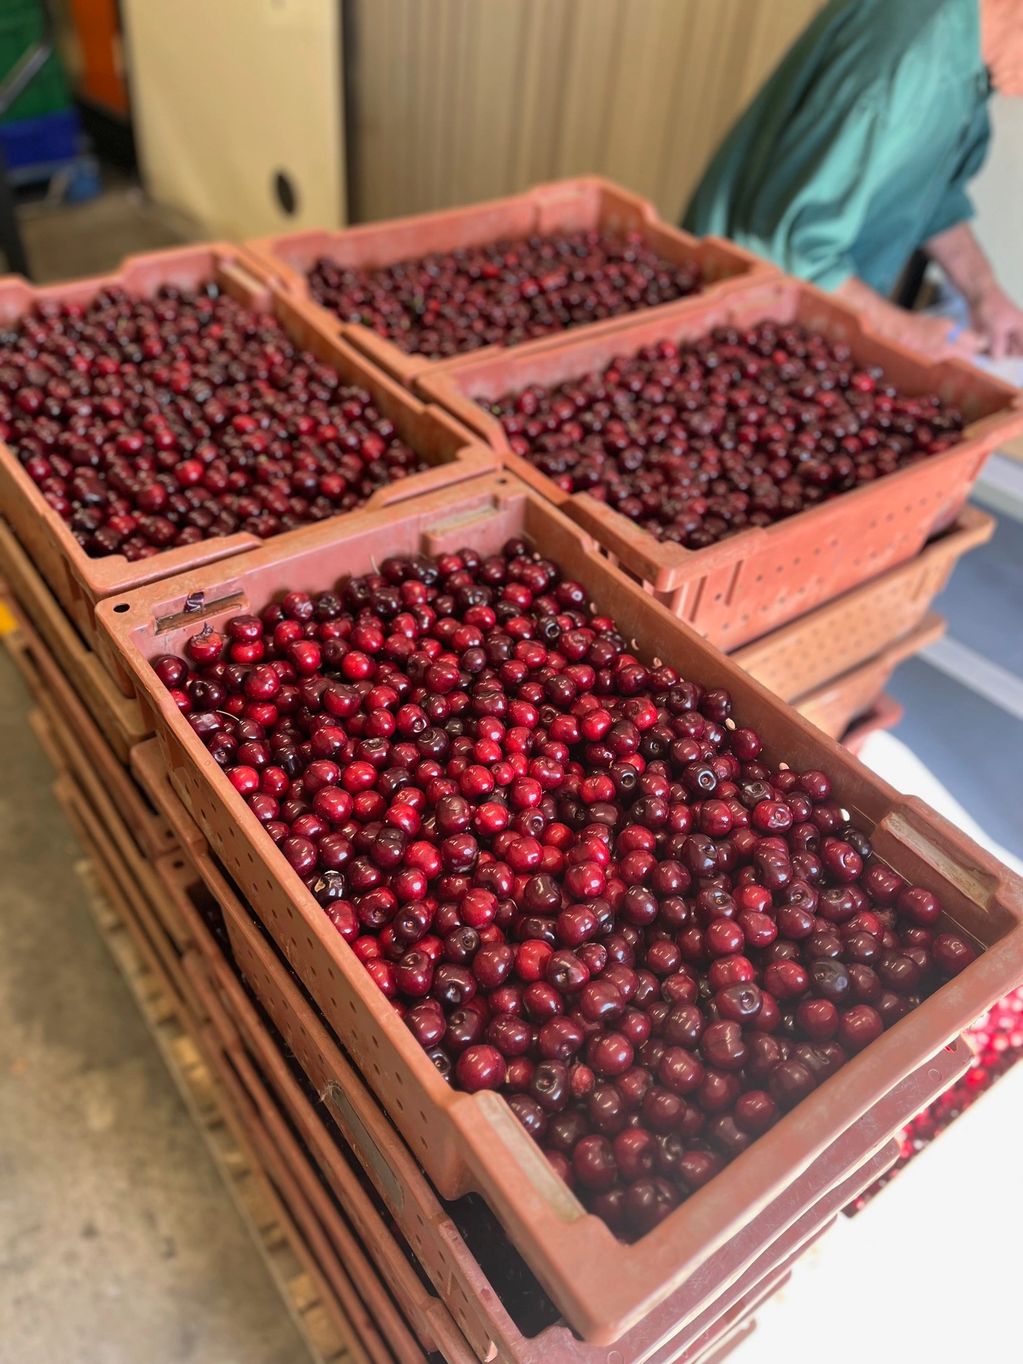 Cherries in lugs are ready to be washed and pitted to be juiced for the shrub.